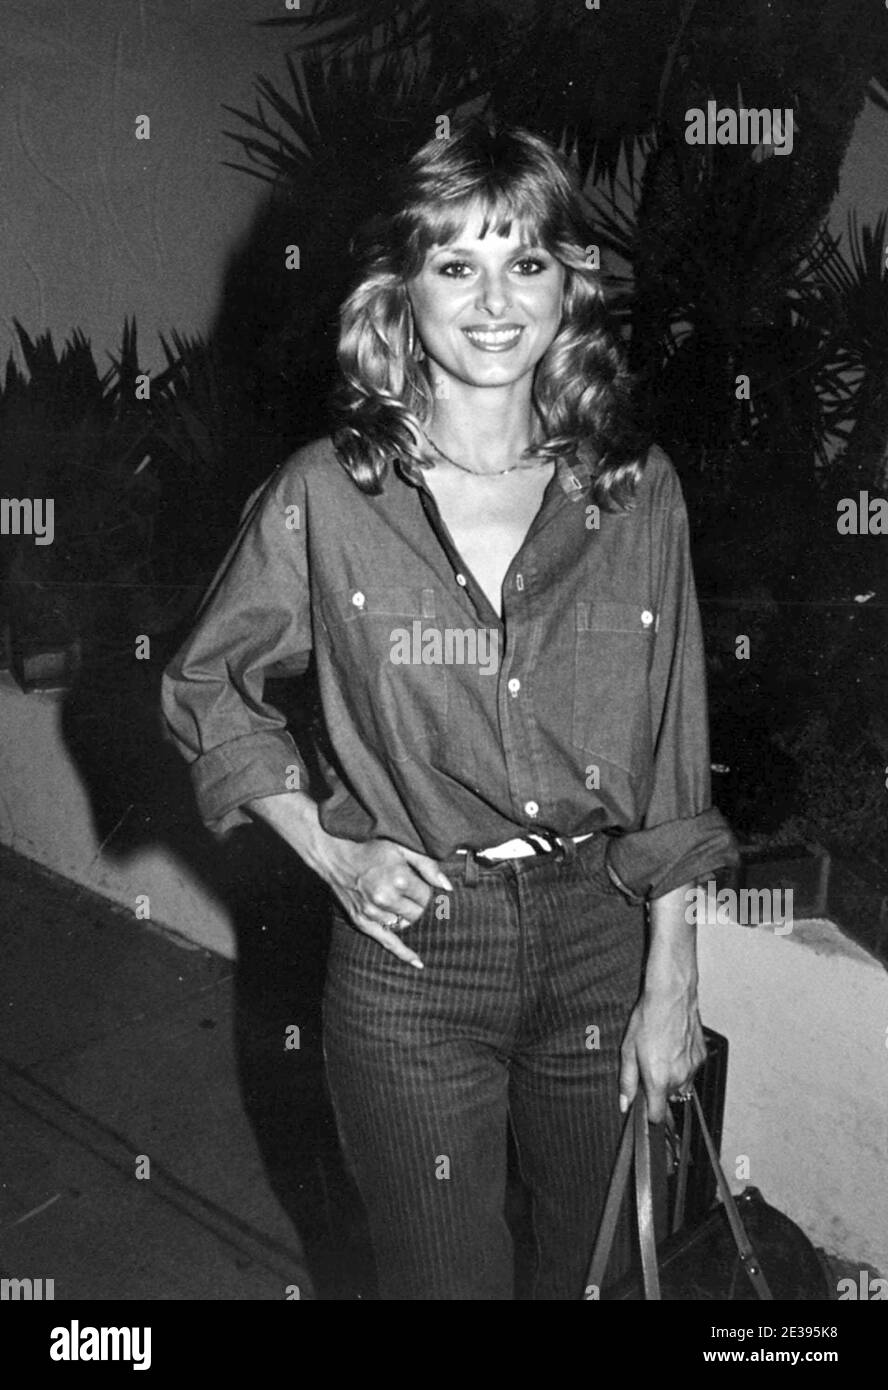 Cathy St George 1982 Credit Ralph Dominguez Mediapunch Stock Photo